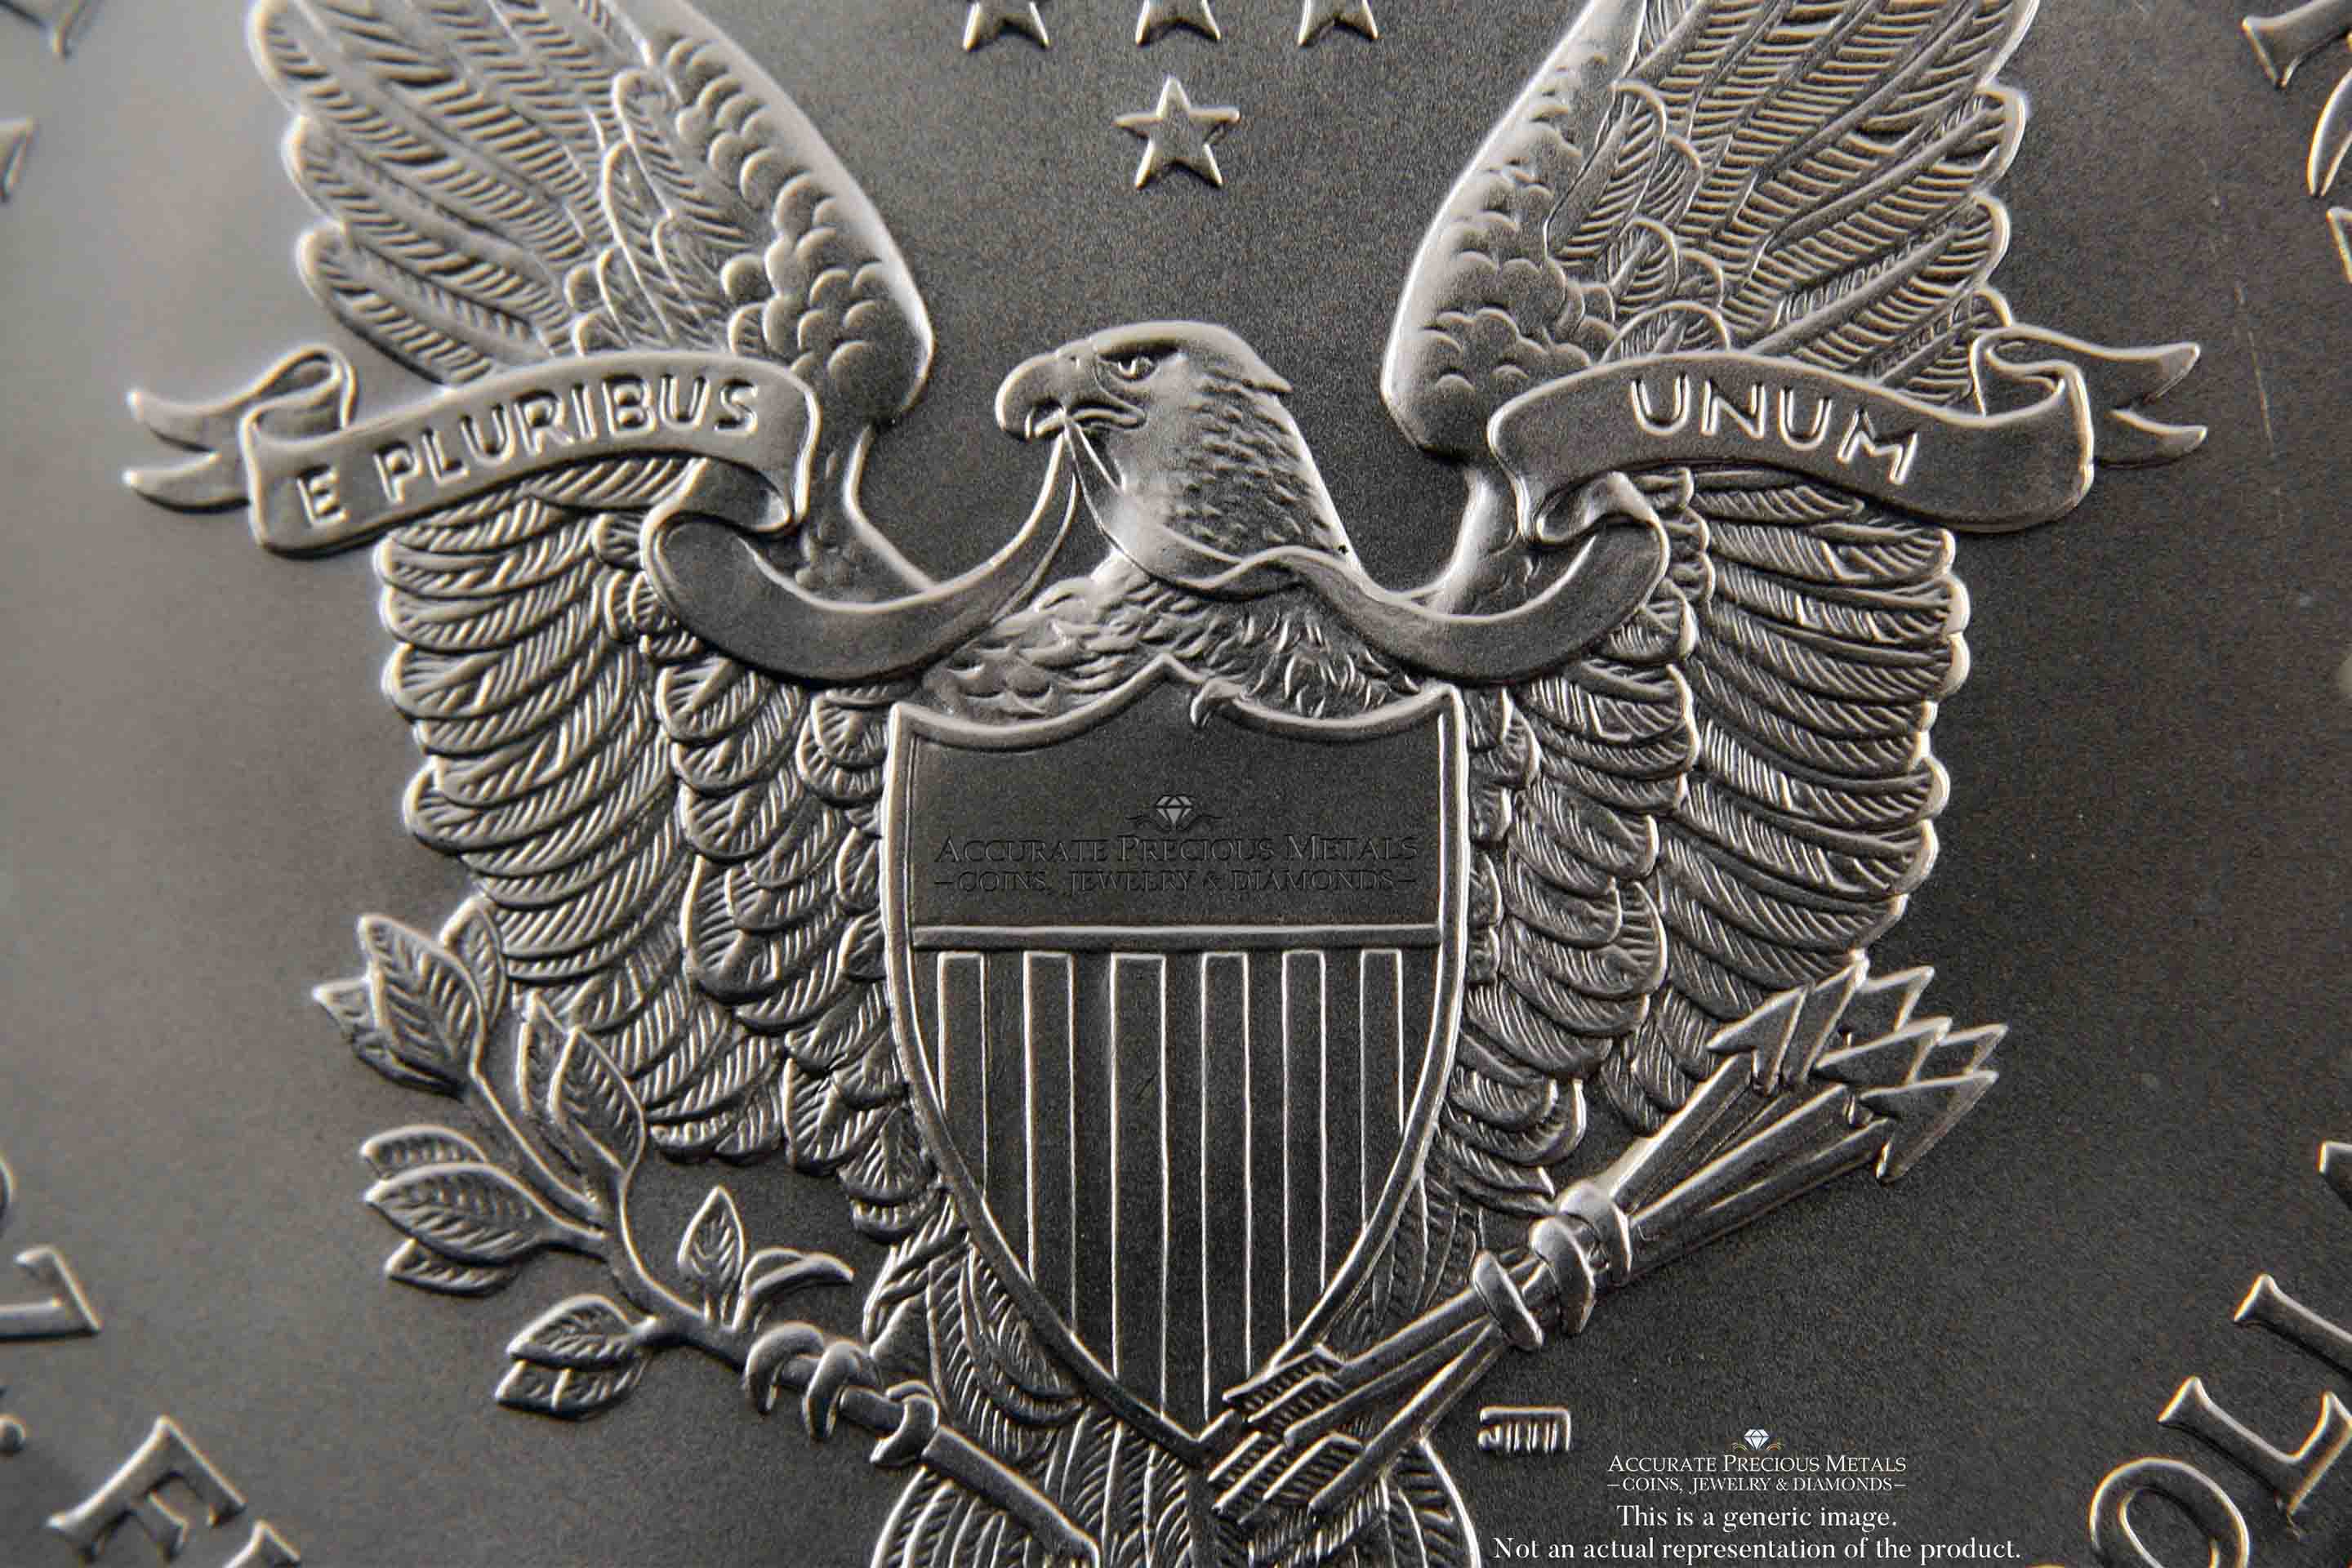 Write me an SEO rich alt text for an image of a 1 ounce american silver eagle coin</p>
<p>JW<br />
"Shiny one ounce American Silver Eagle coin, displaying the distinctive Walking Liberty design, a valuable addition to any precious metal collection.